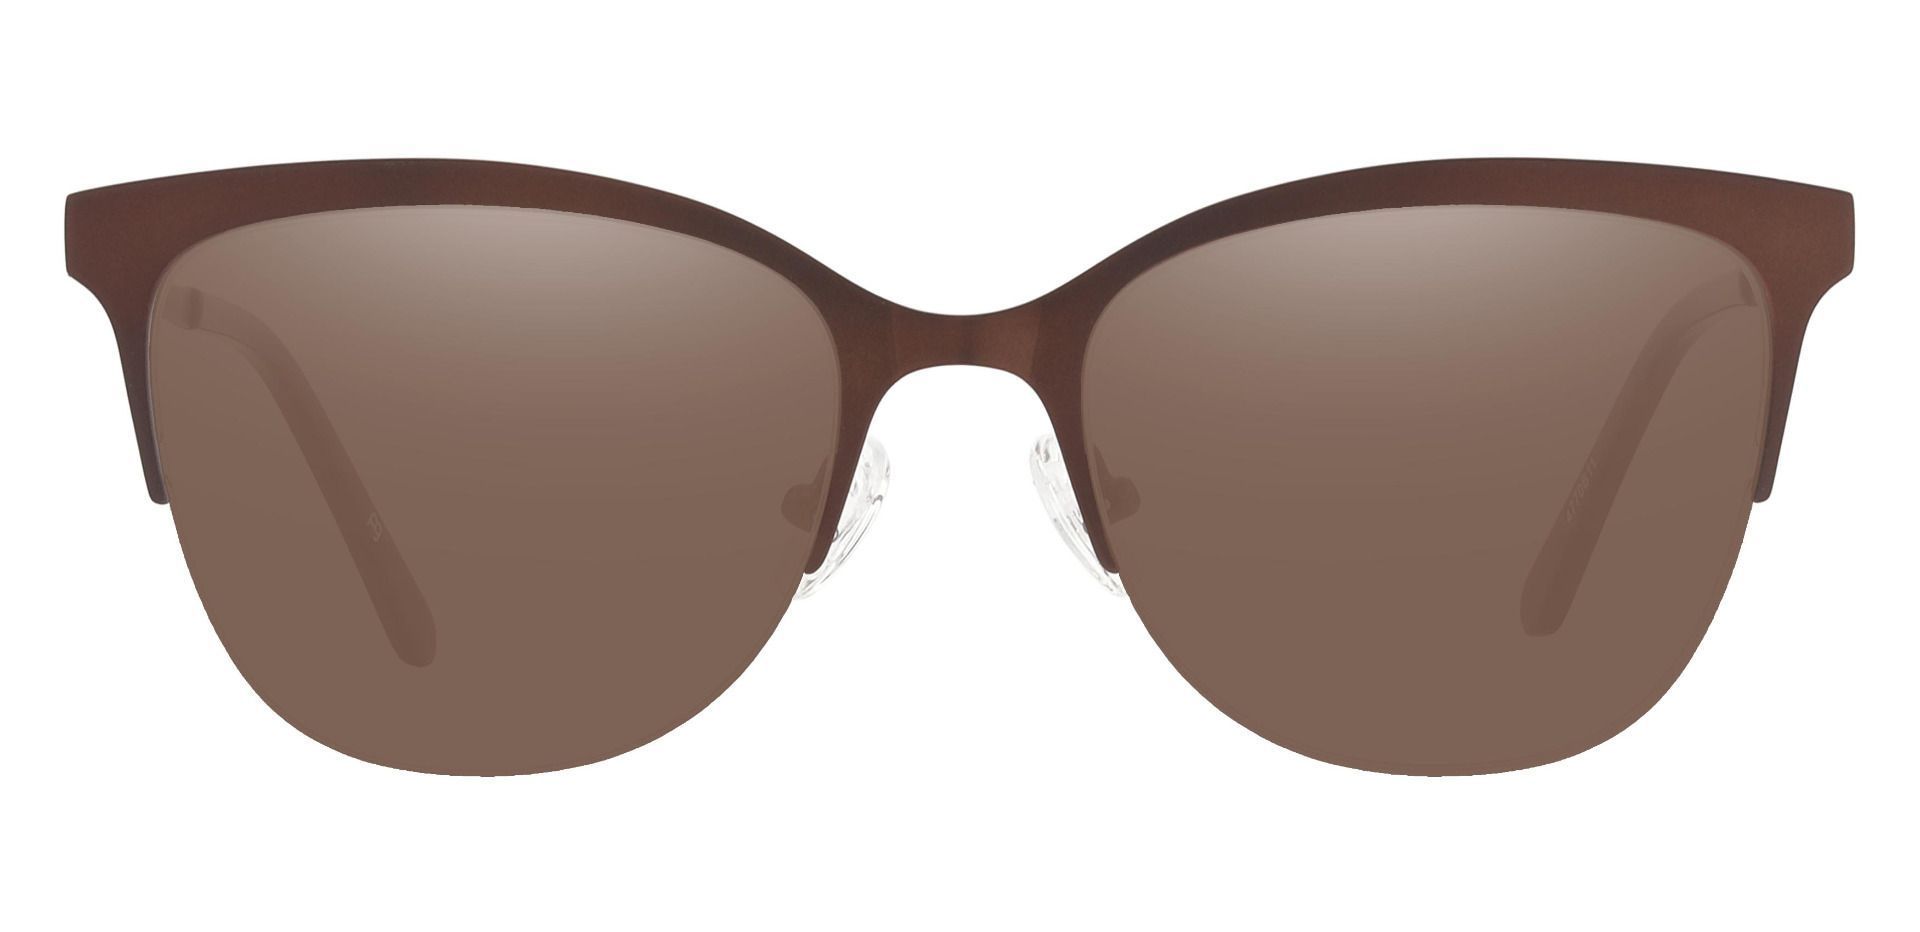 Winnie Oval Prescription Sunglasses - Brown Frame With Brown Lenses